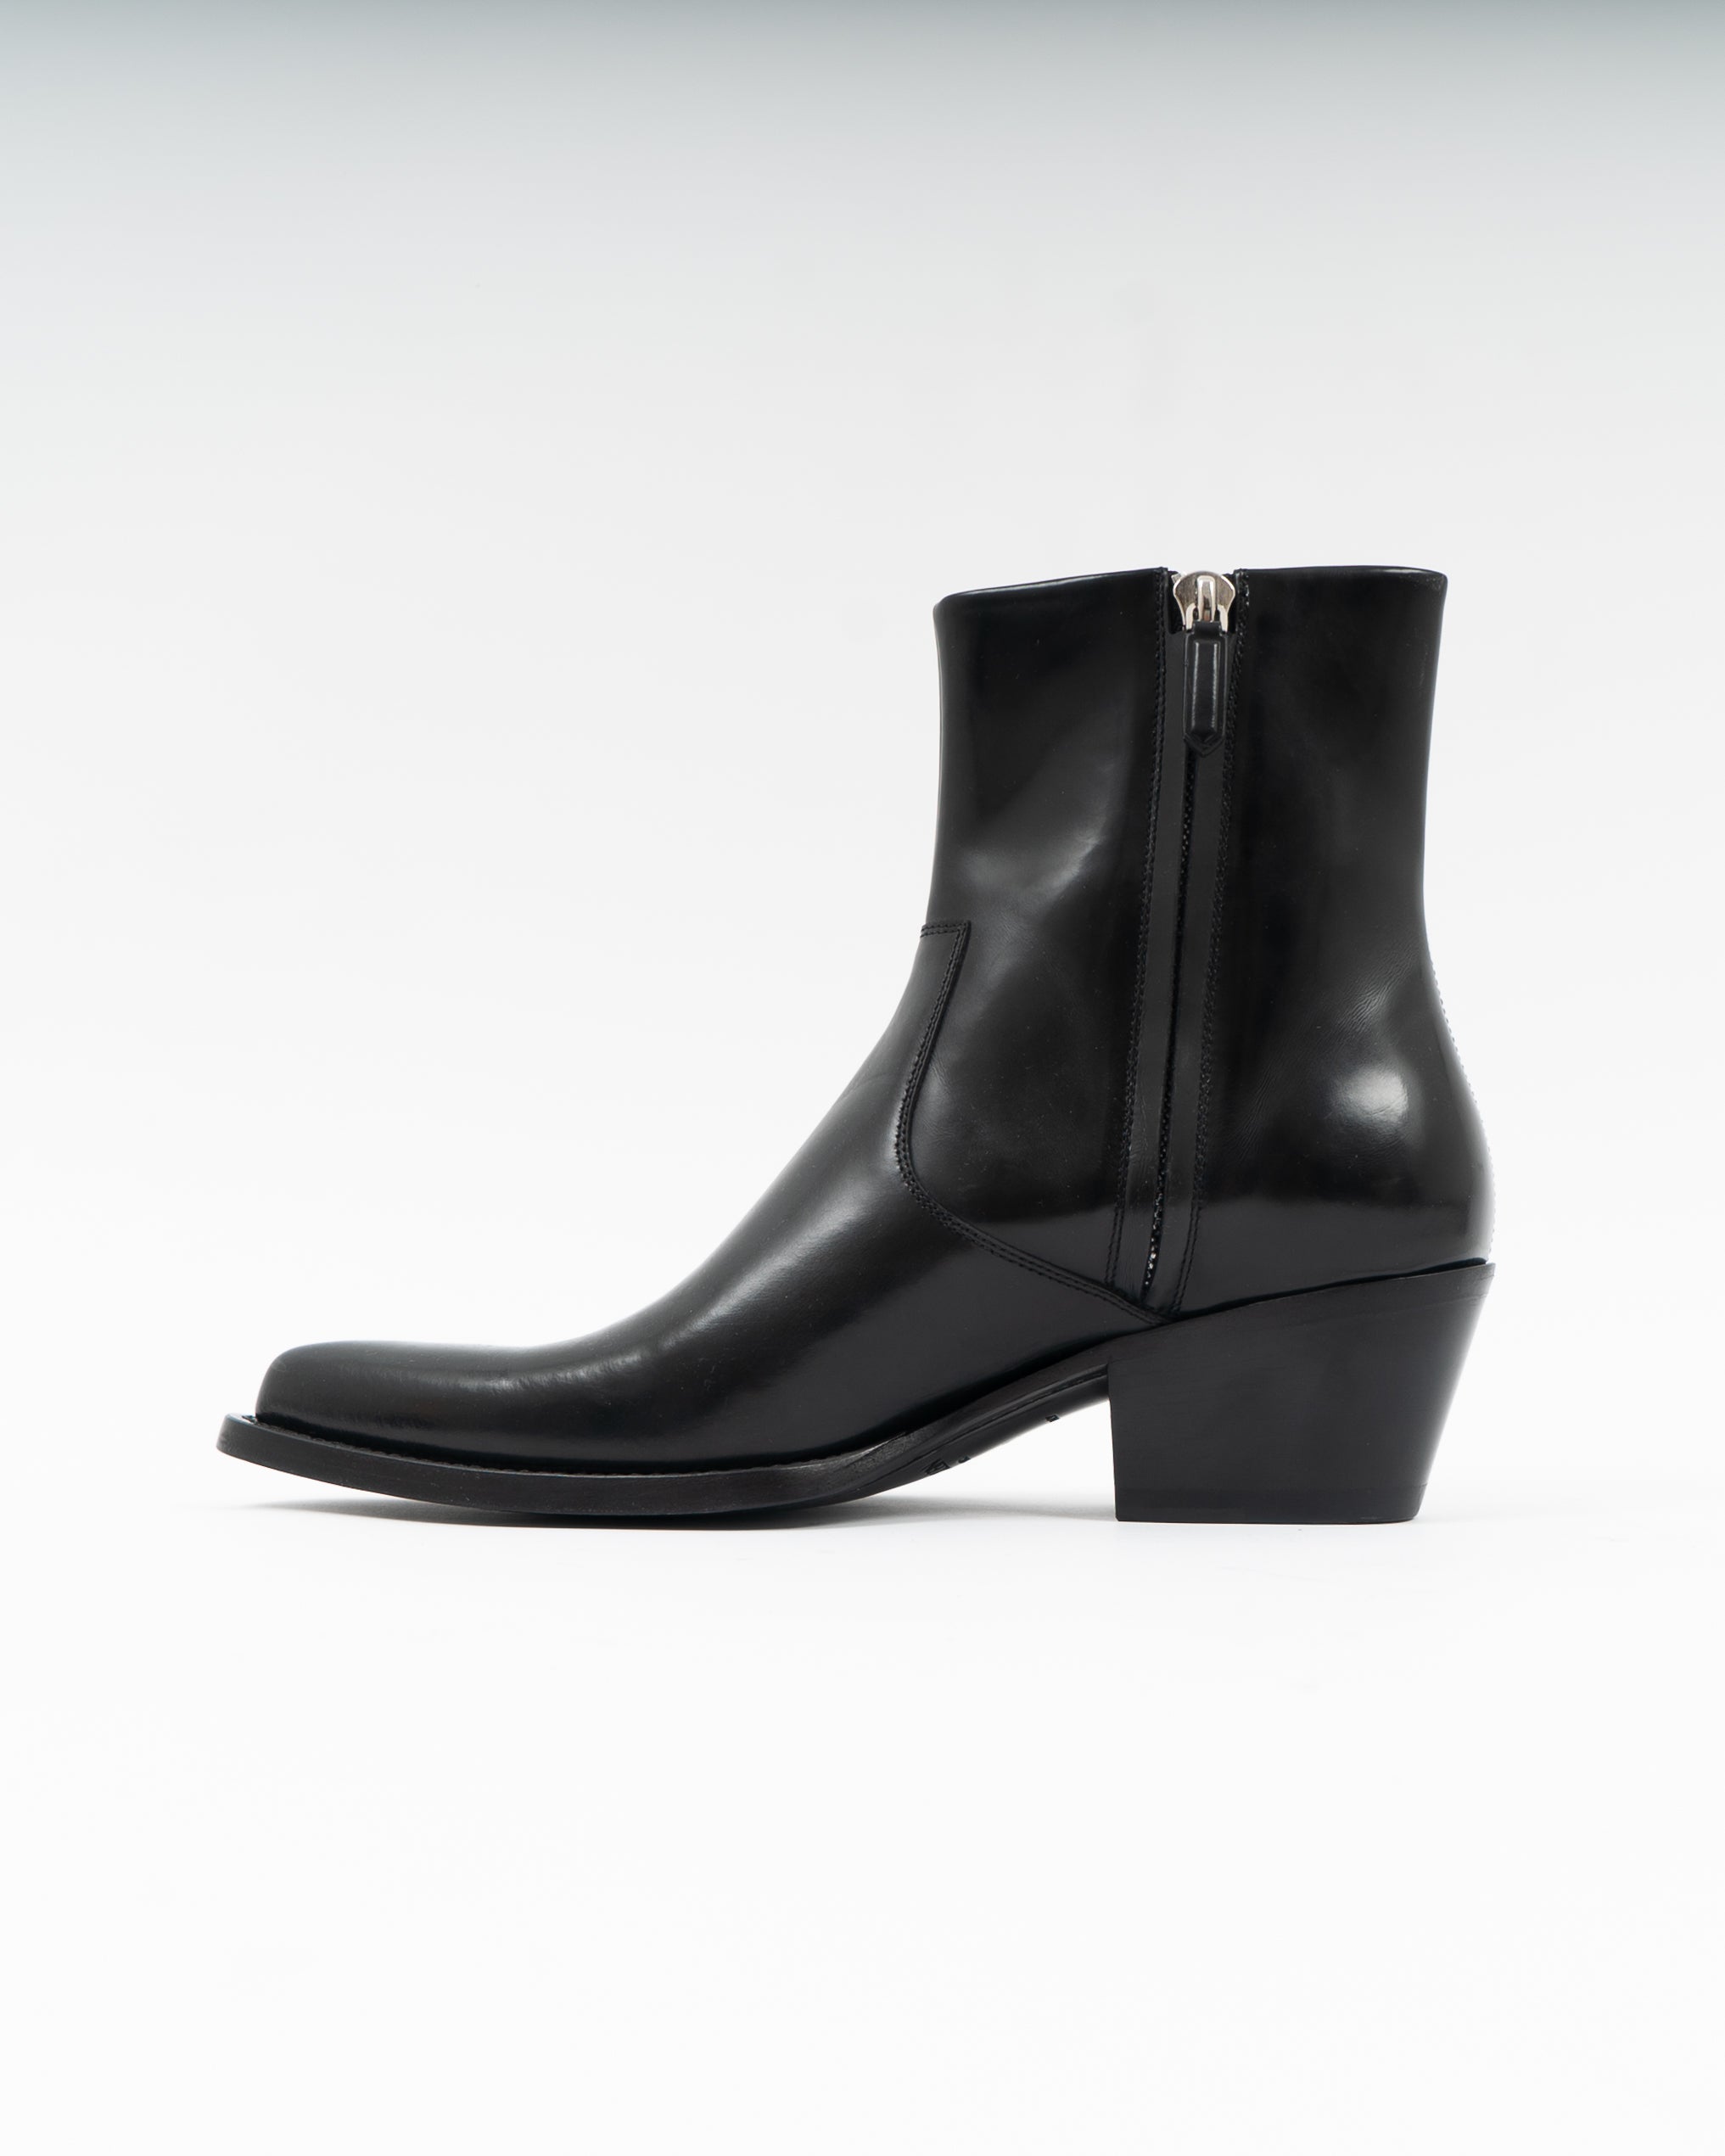 FW17 Tex-C Black Leather 50mm Western Boots